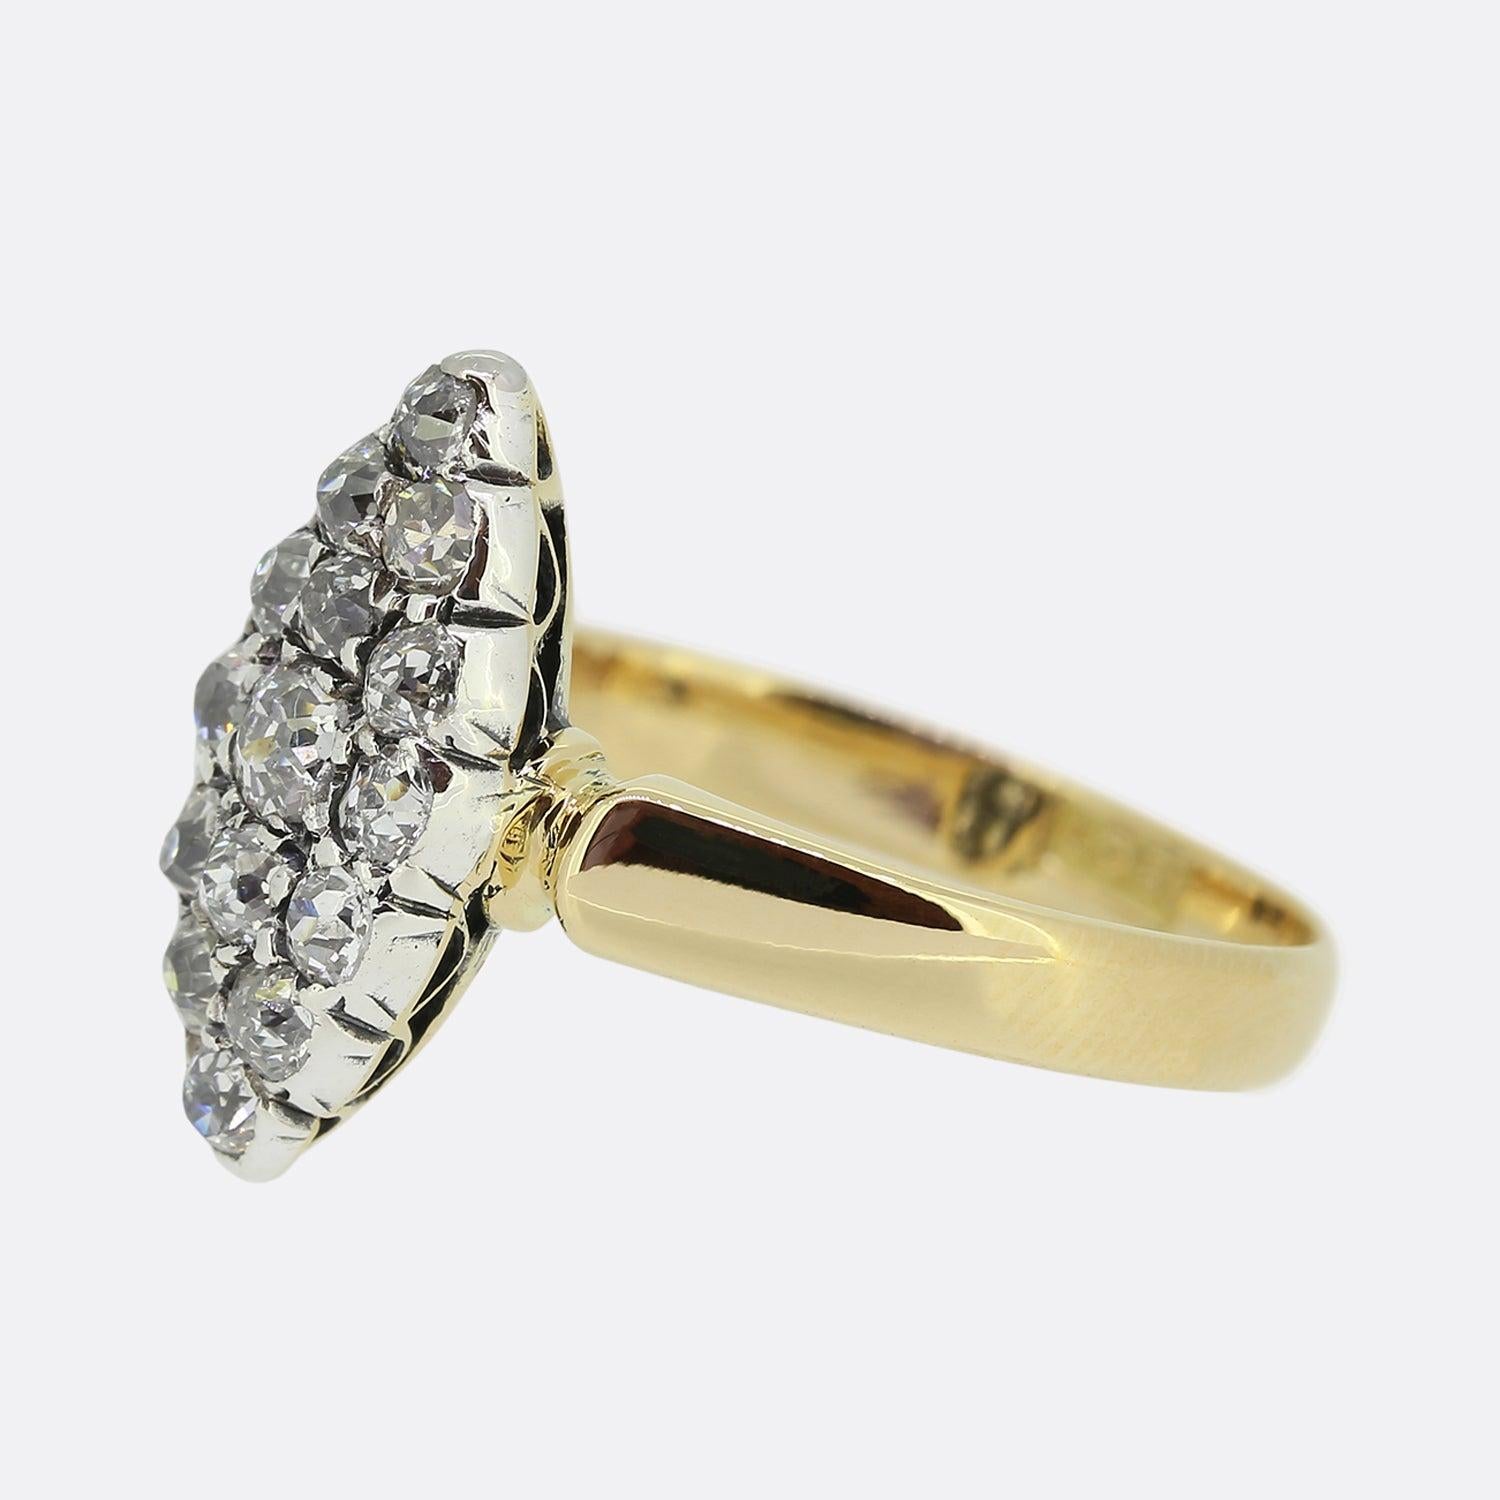 Here we have an antique diamond navette ring from the Edwardian era. The piece showcases a boat-like shaped face which has been filled with a vast array of closely claw set old cut diamonds in platinum atop a plain polished 18ct yellow gold band.